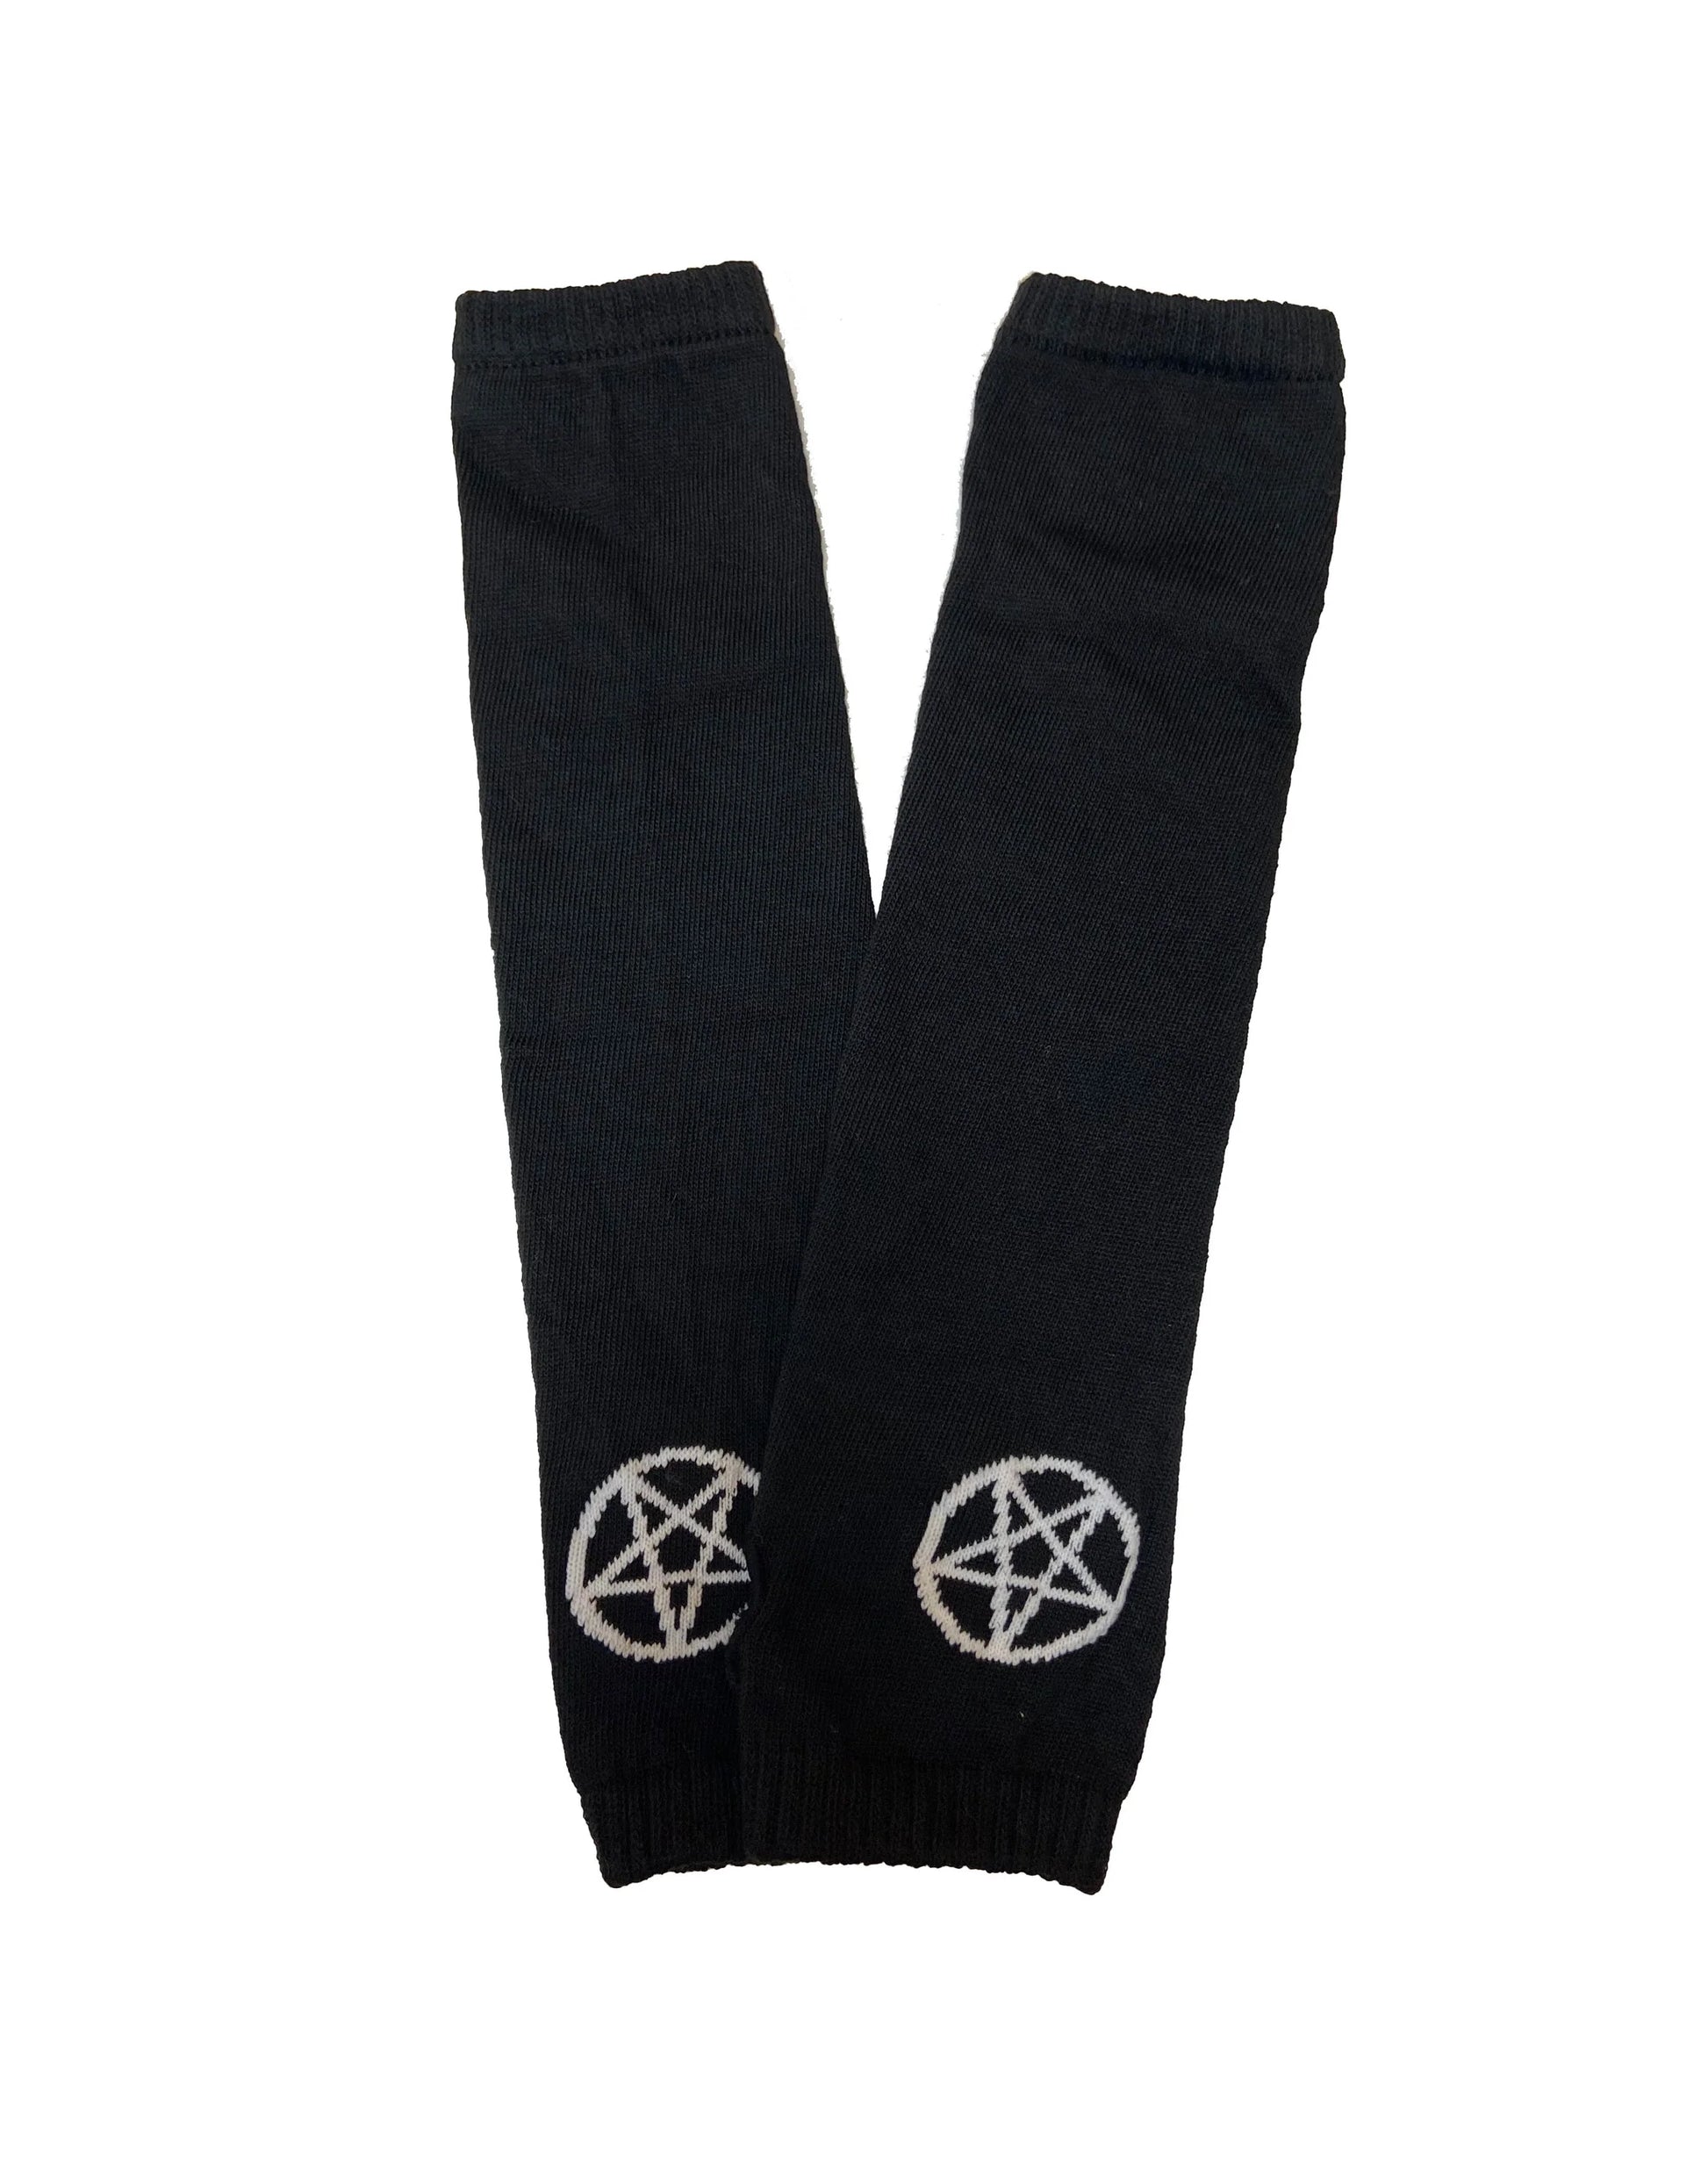 Pamela Mann Knitted Pentagram Fingerless Gloves - Black knitted tube arm sleeves with a hole for your thumb and white pentagram symbol, can also be worn as a neat leg-warmer.